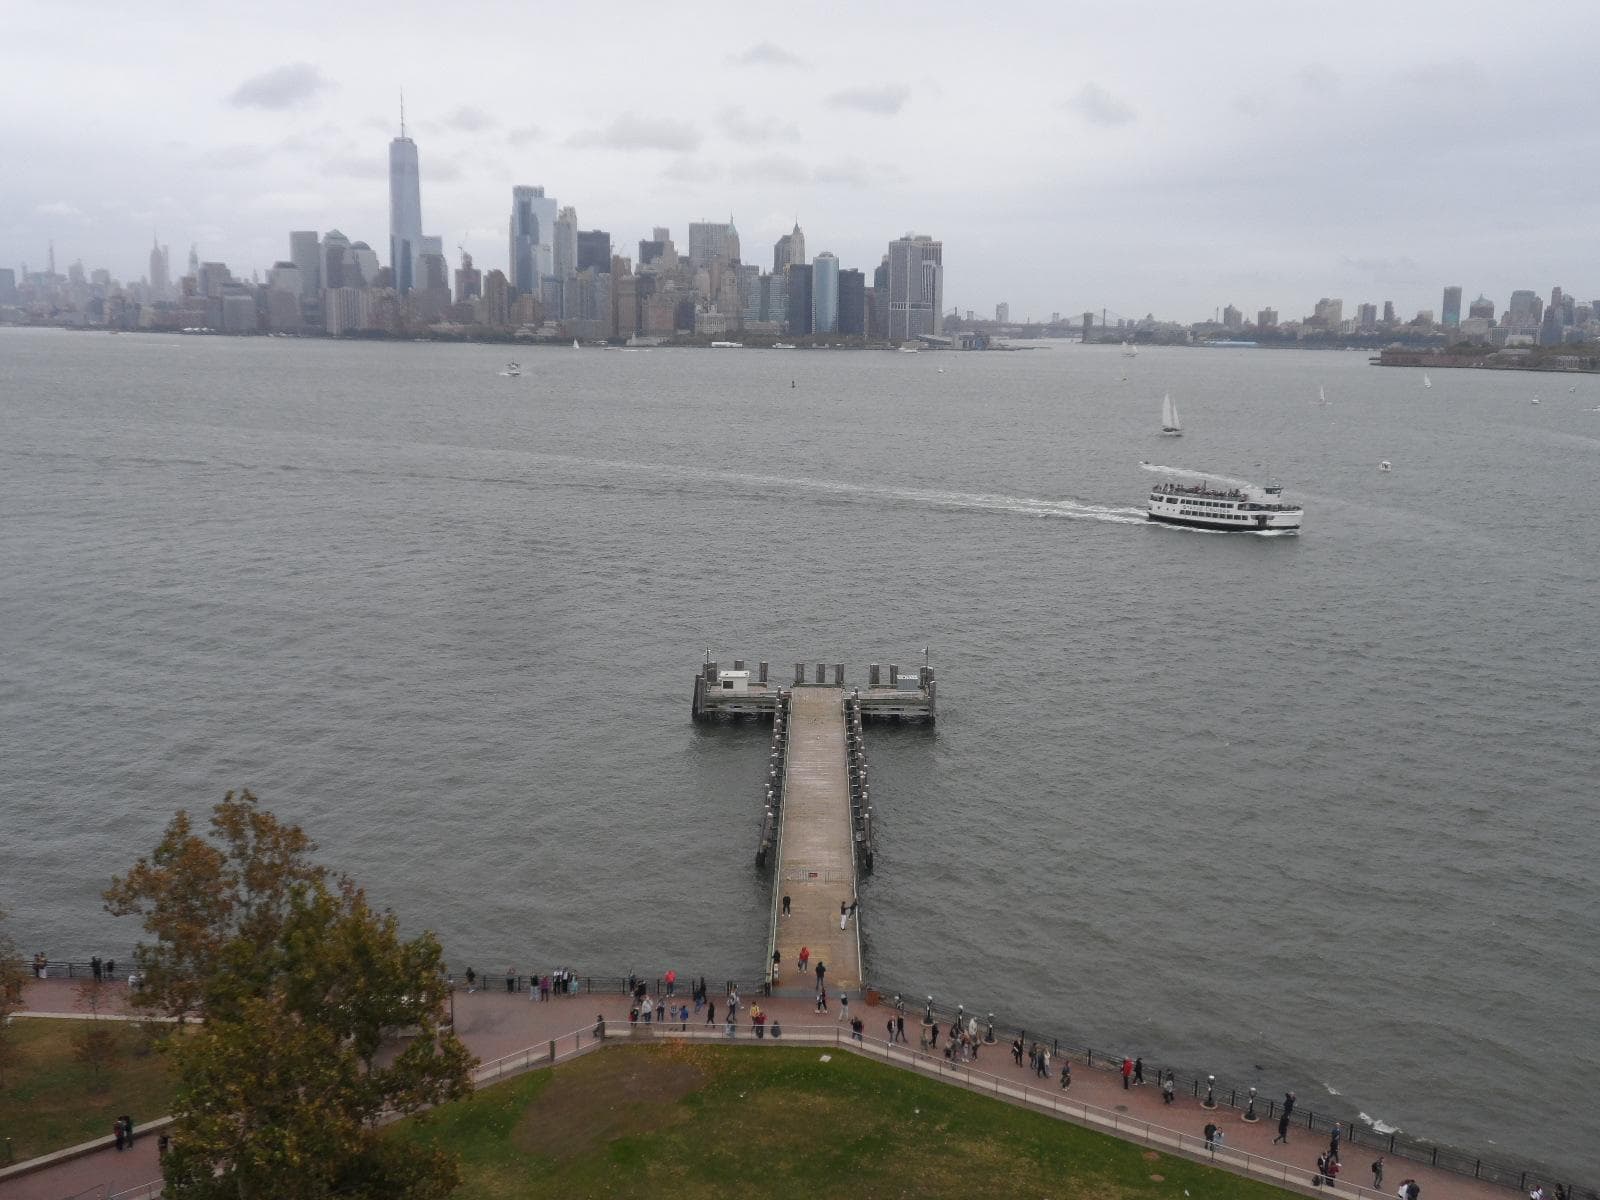 The view of South Manhattan from the pedestal; photo credit: Katherine Michel